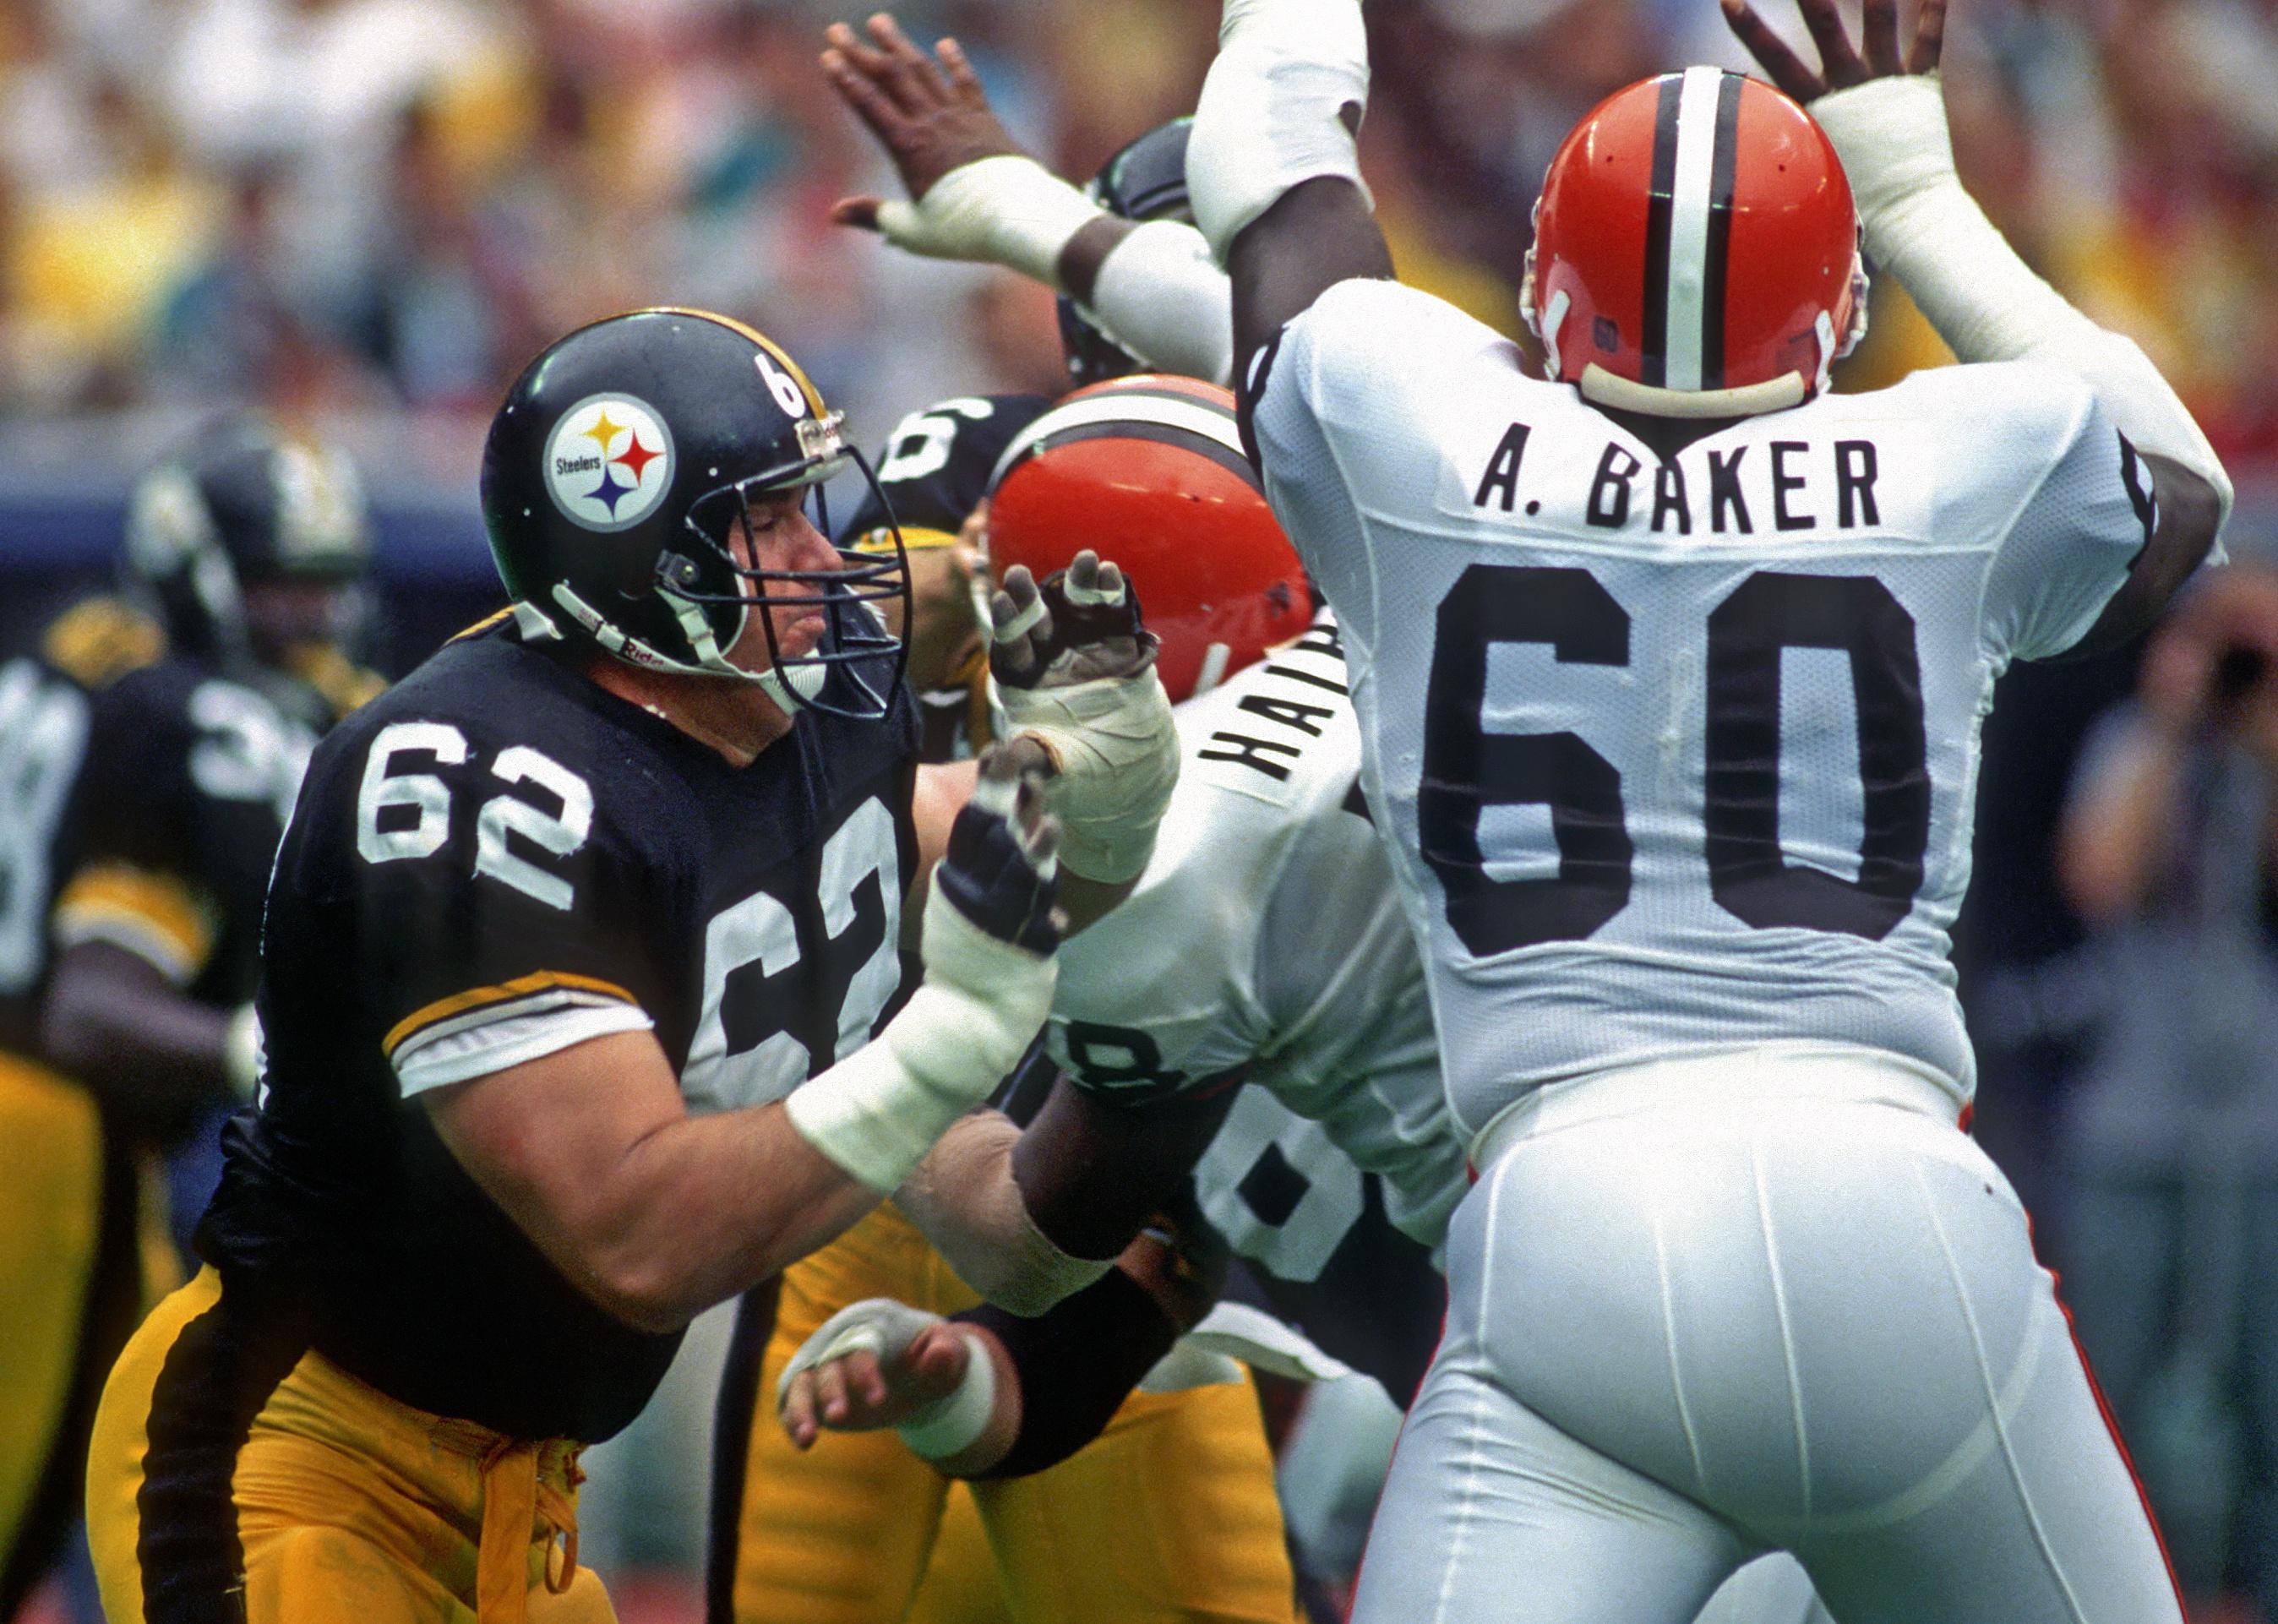 Offensive lineman Tunch Ilkin of the Pittsburgh Steelers blocks defensive lineman Al Baker #60 of the Cleveland Browns.